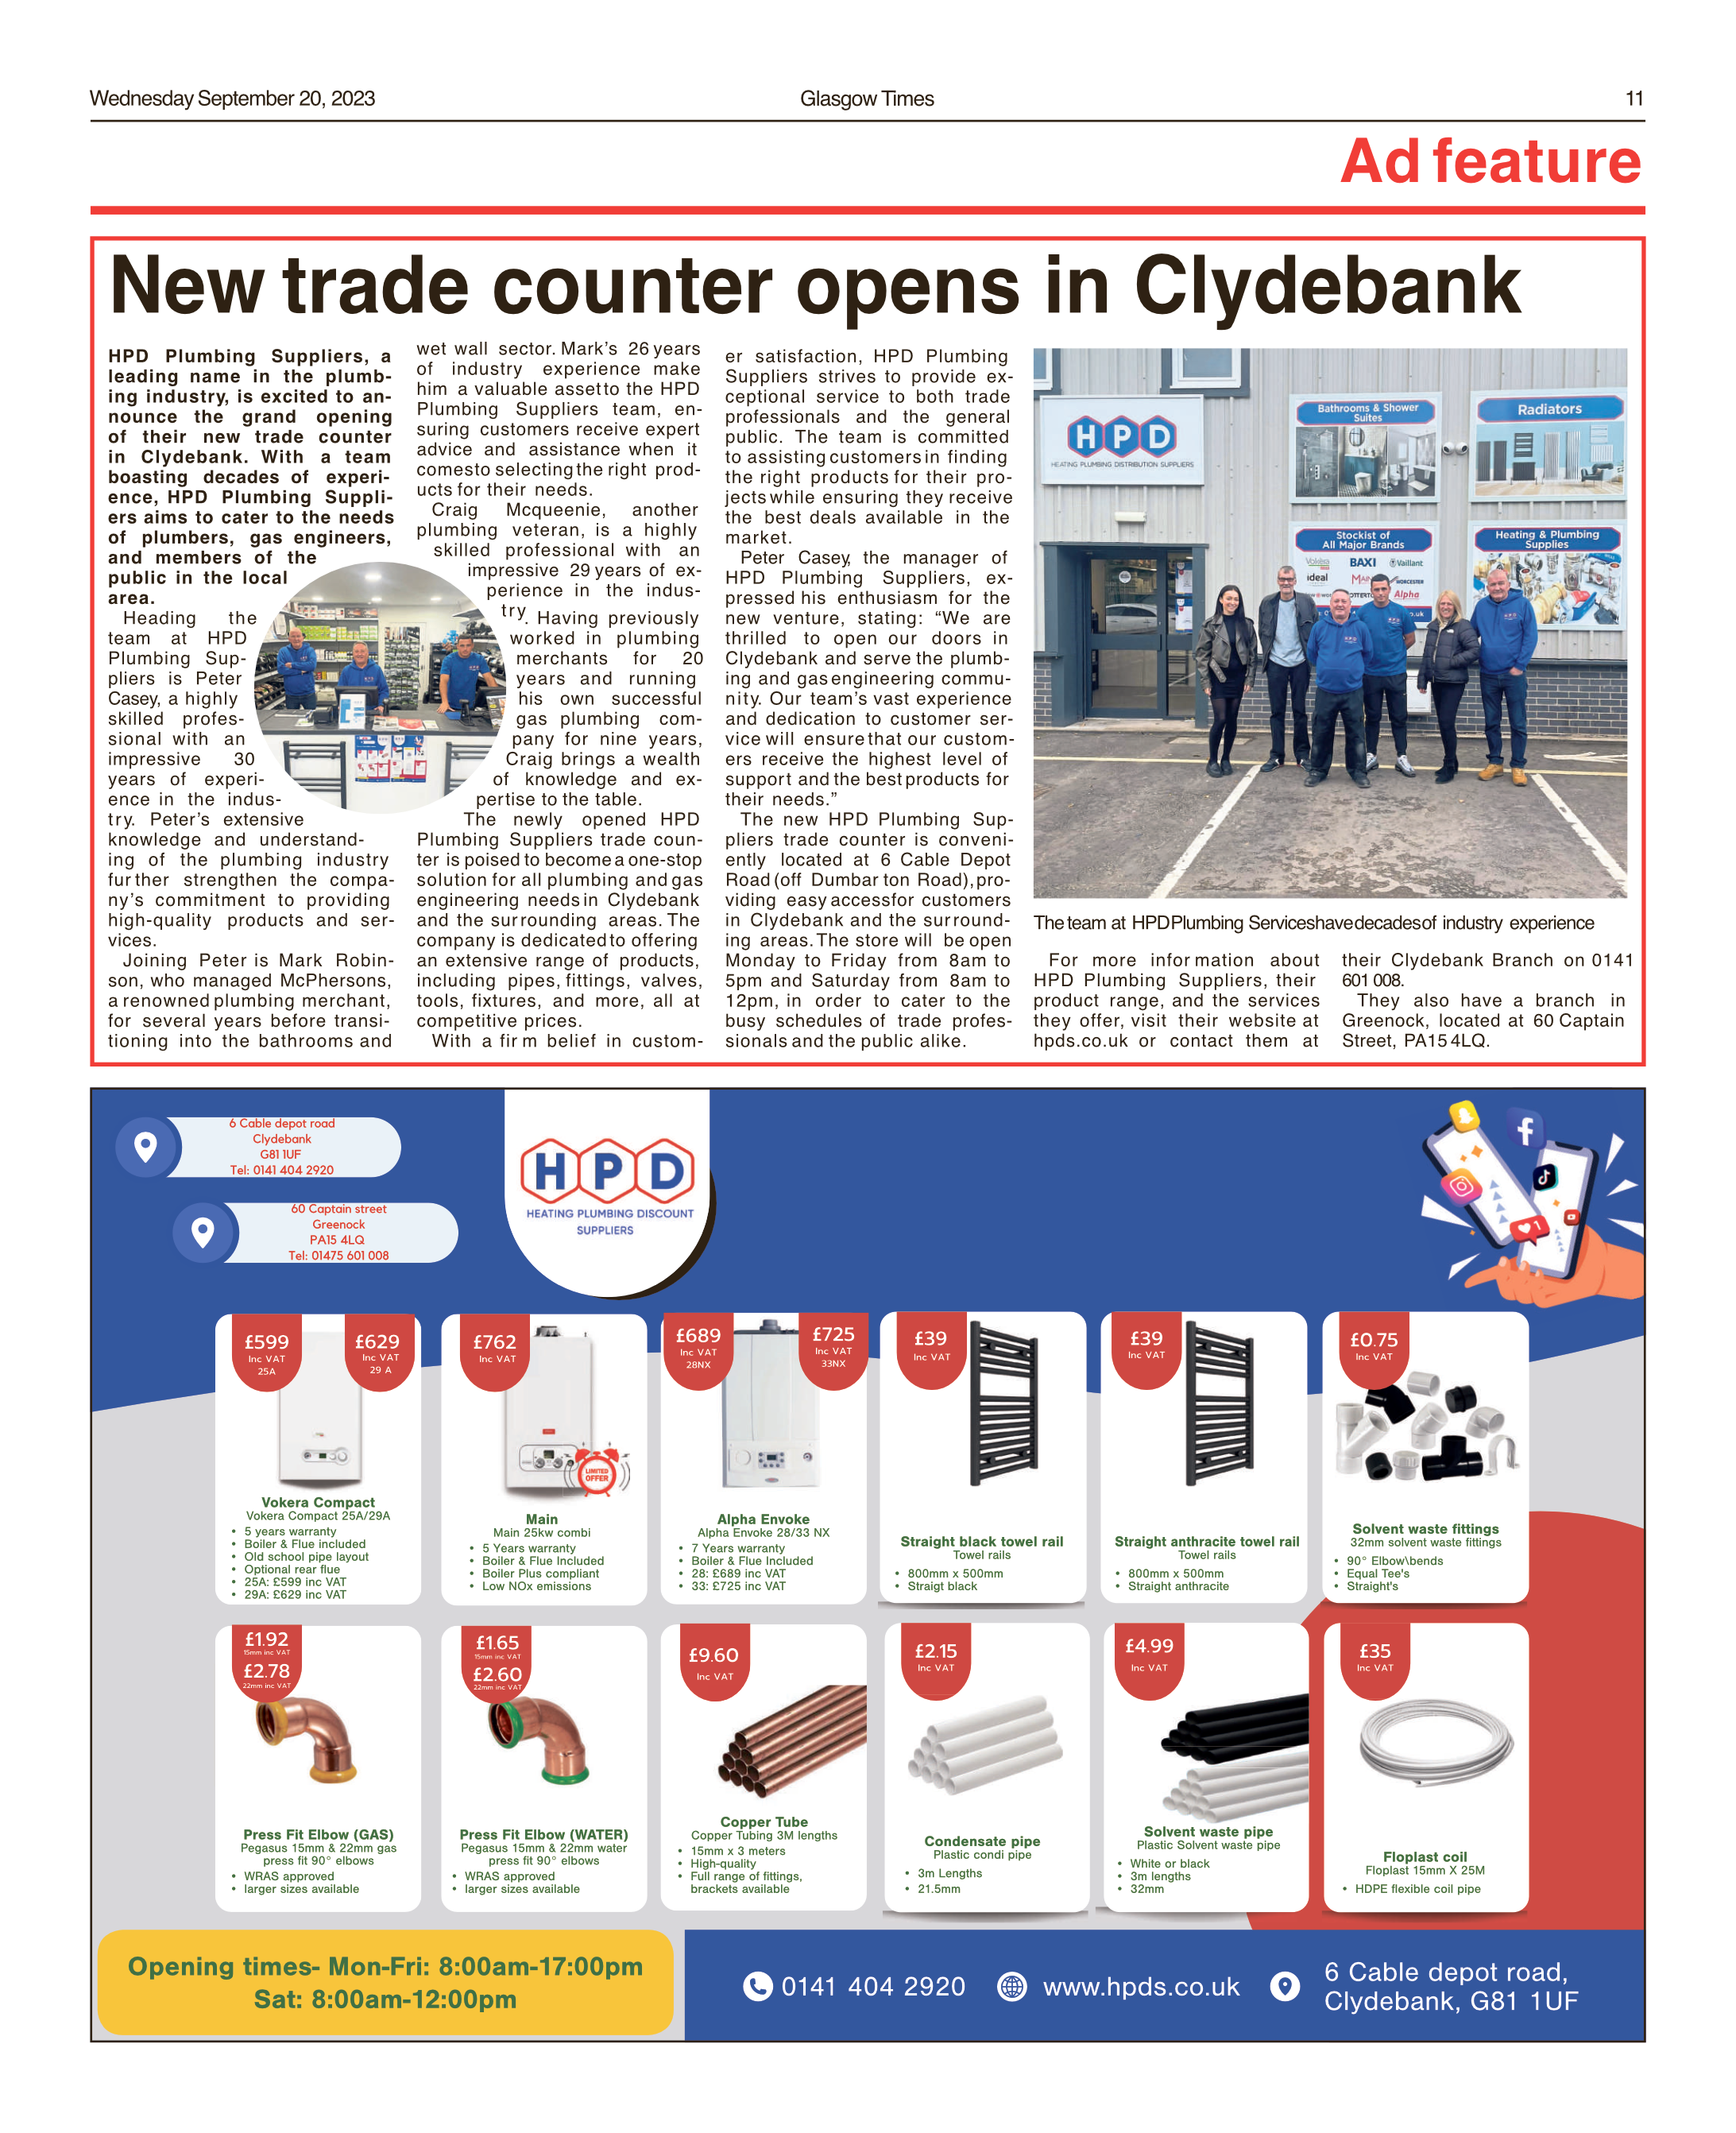 GLASGOW TIMES: 'New trade counter opens in Clydebank.'